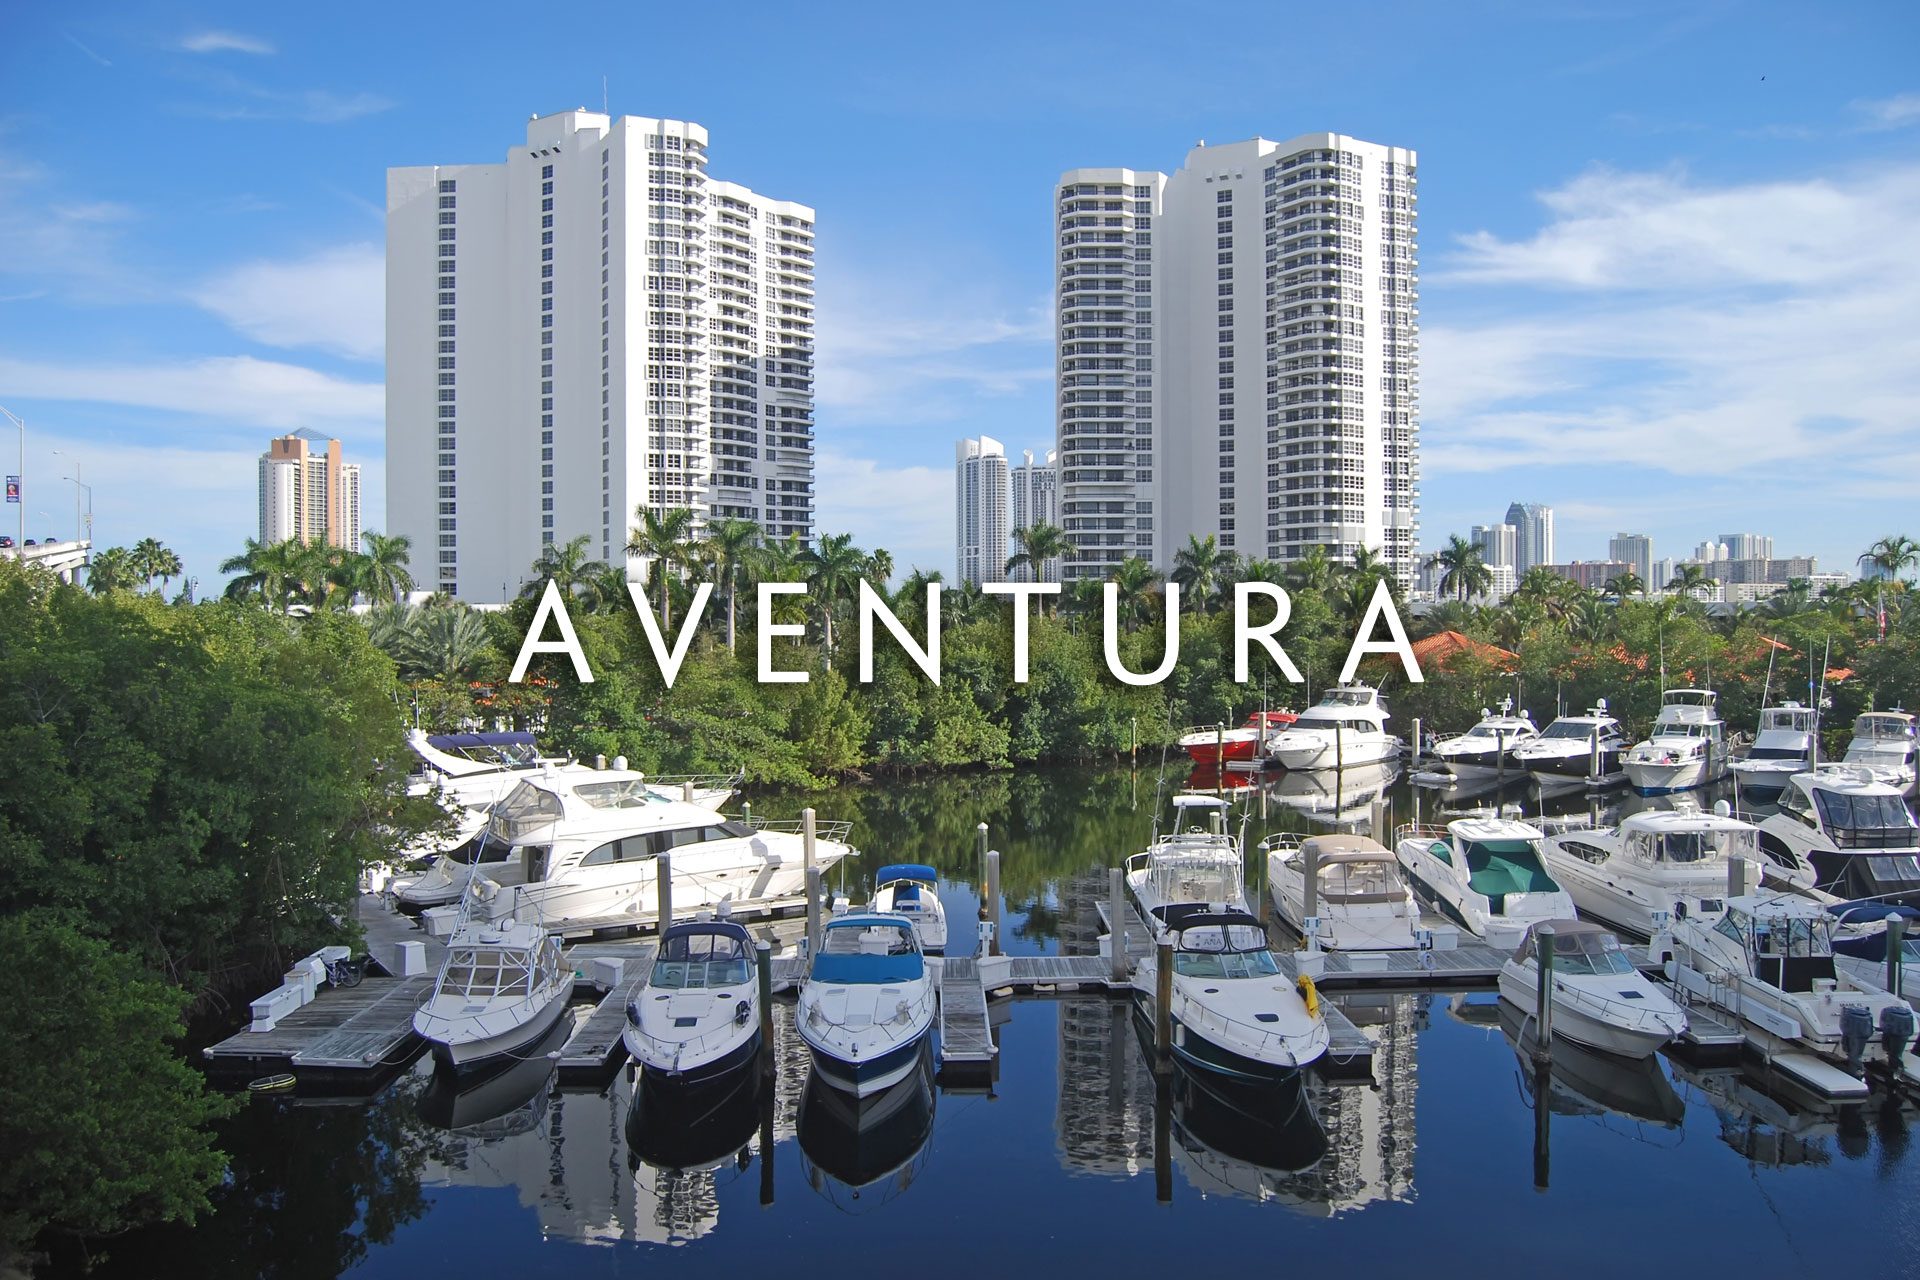 Aventura condo buildings on oceanway with various yachts in front of them